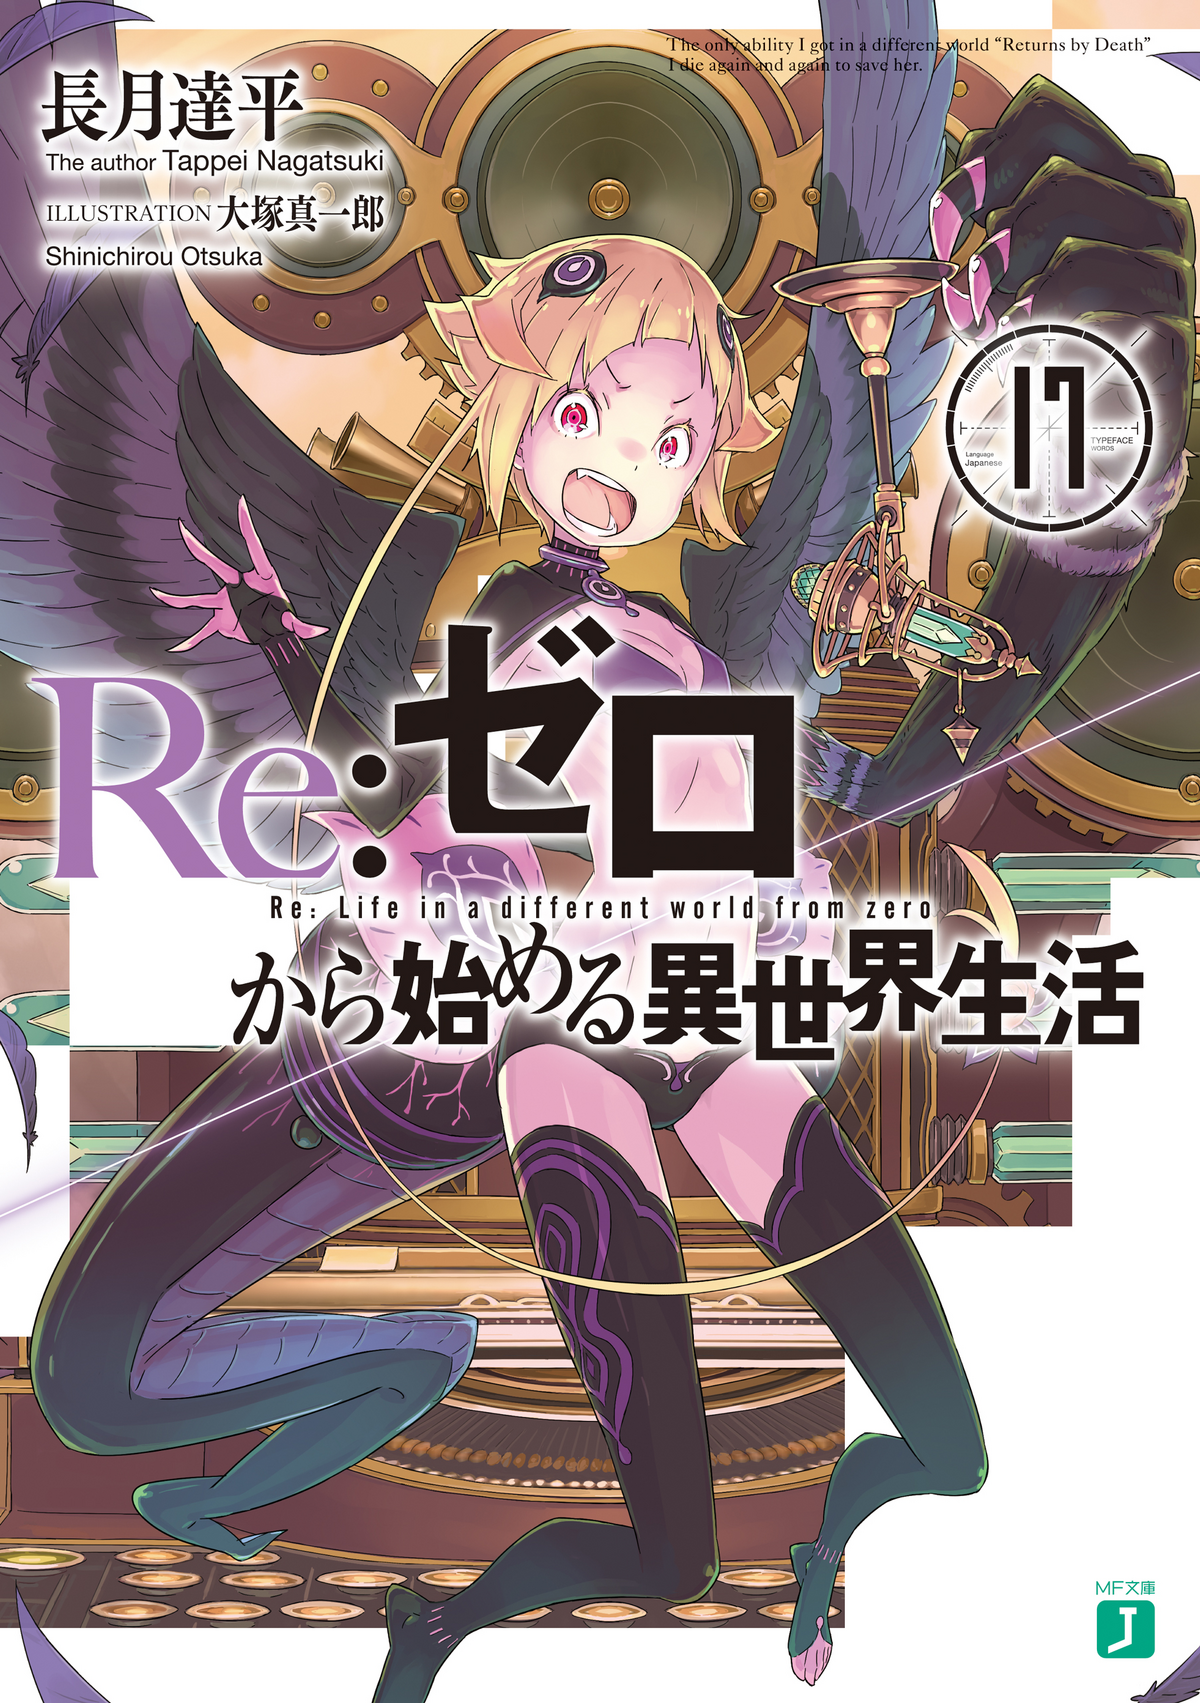 Just found this on the Re:zero wiki from the illustrations of volume 11,  why did the anime cut it!? [Media] : r/Re_Zero